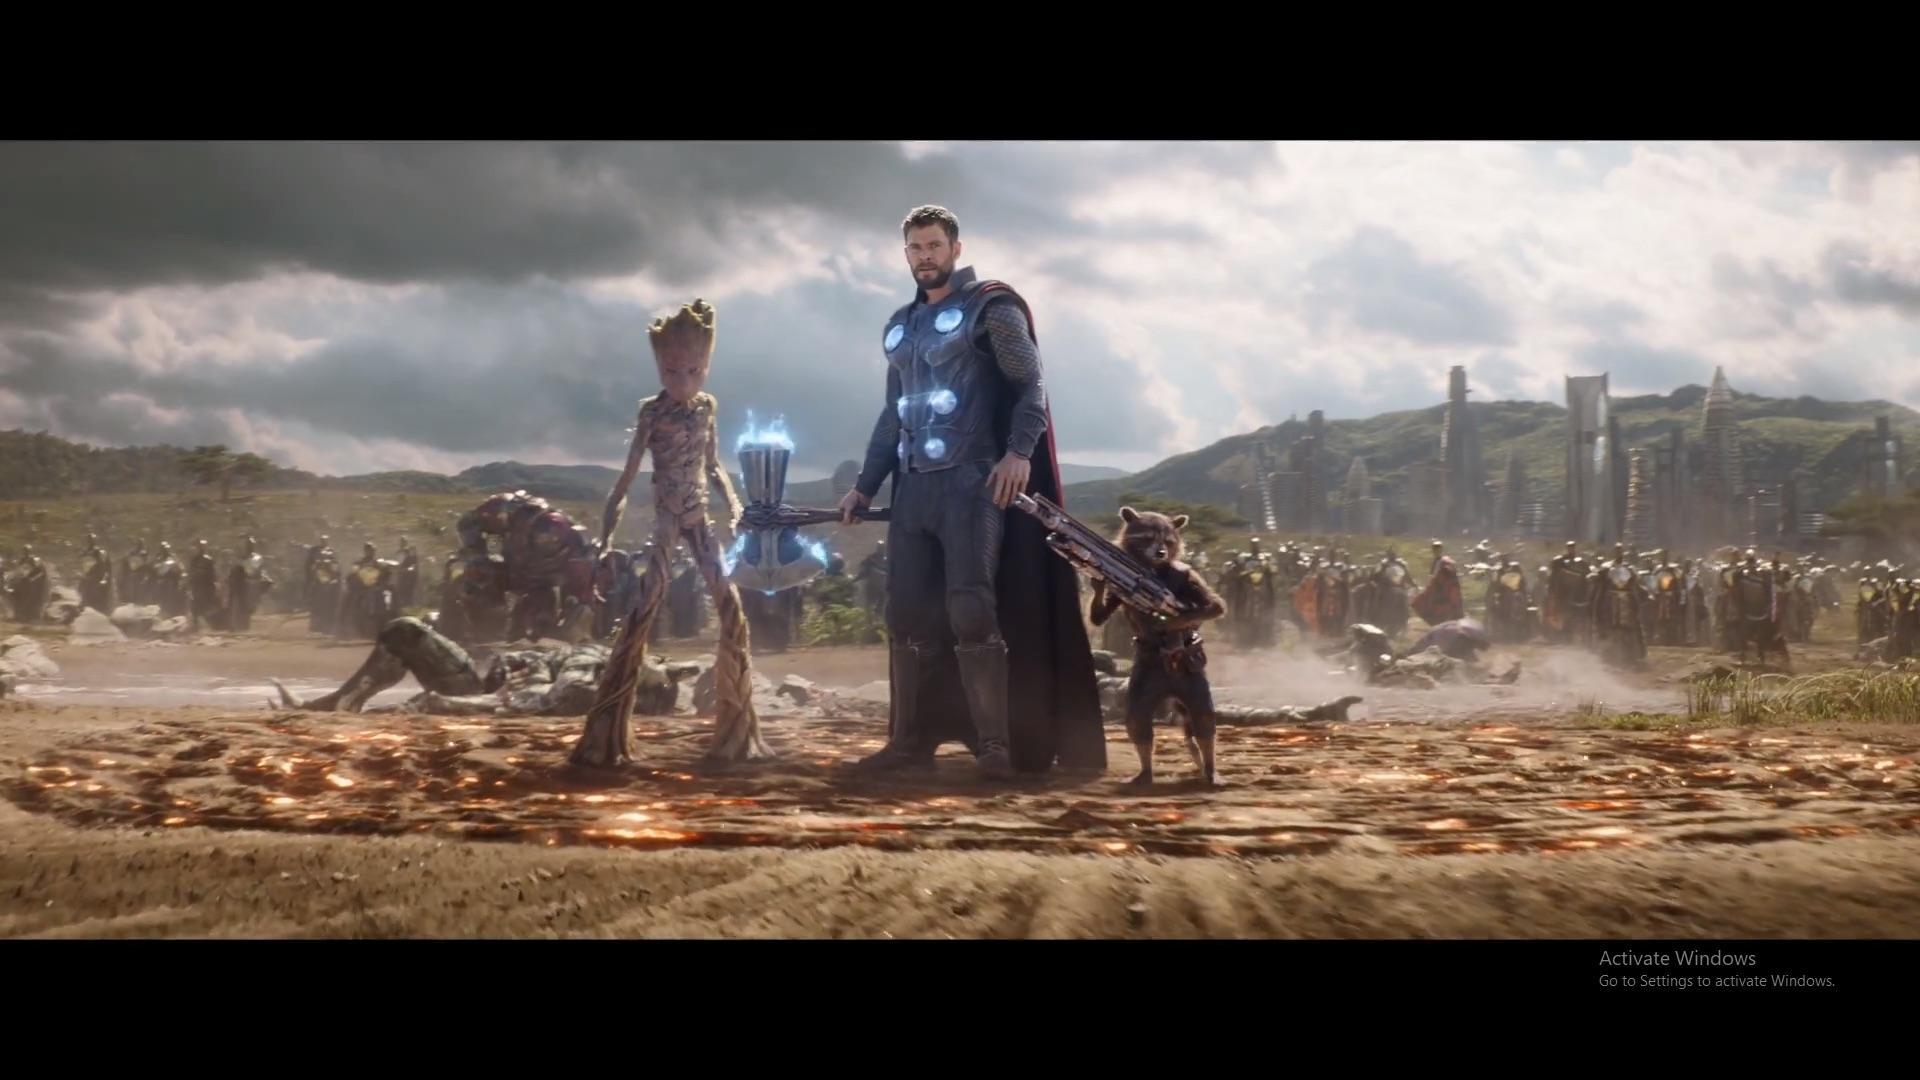 This scene gets better when you realize no one in Wakanda was